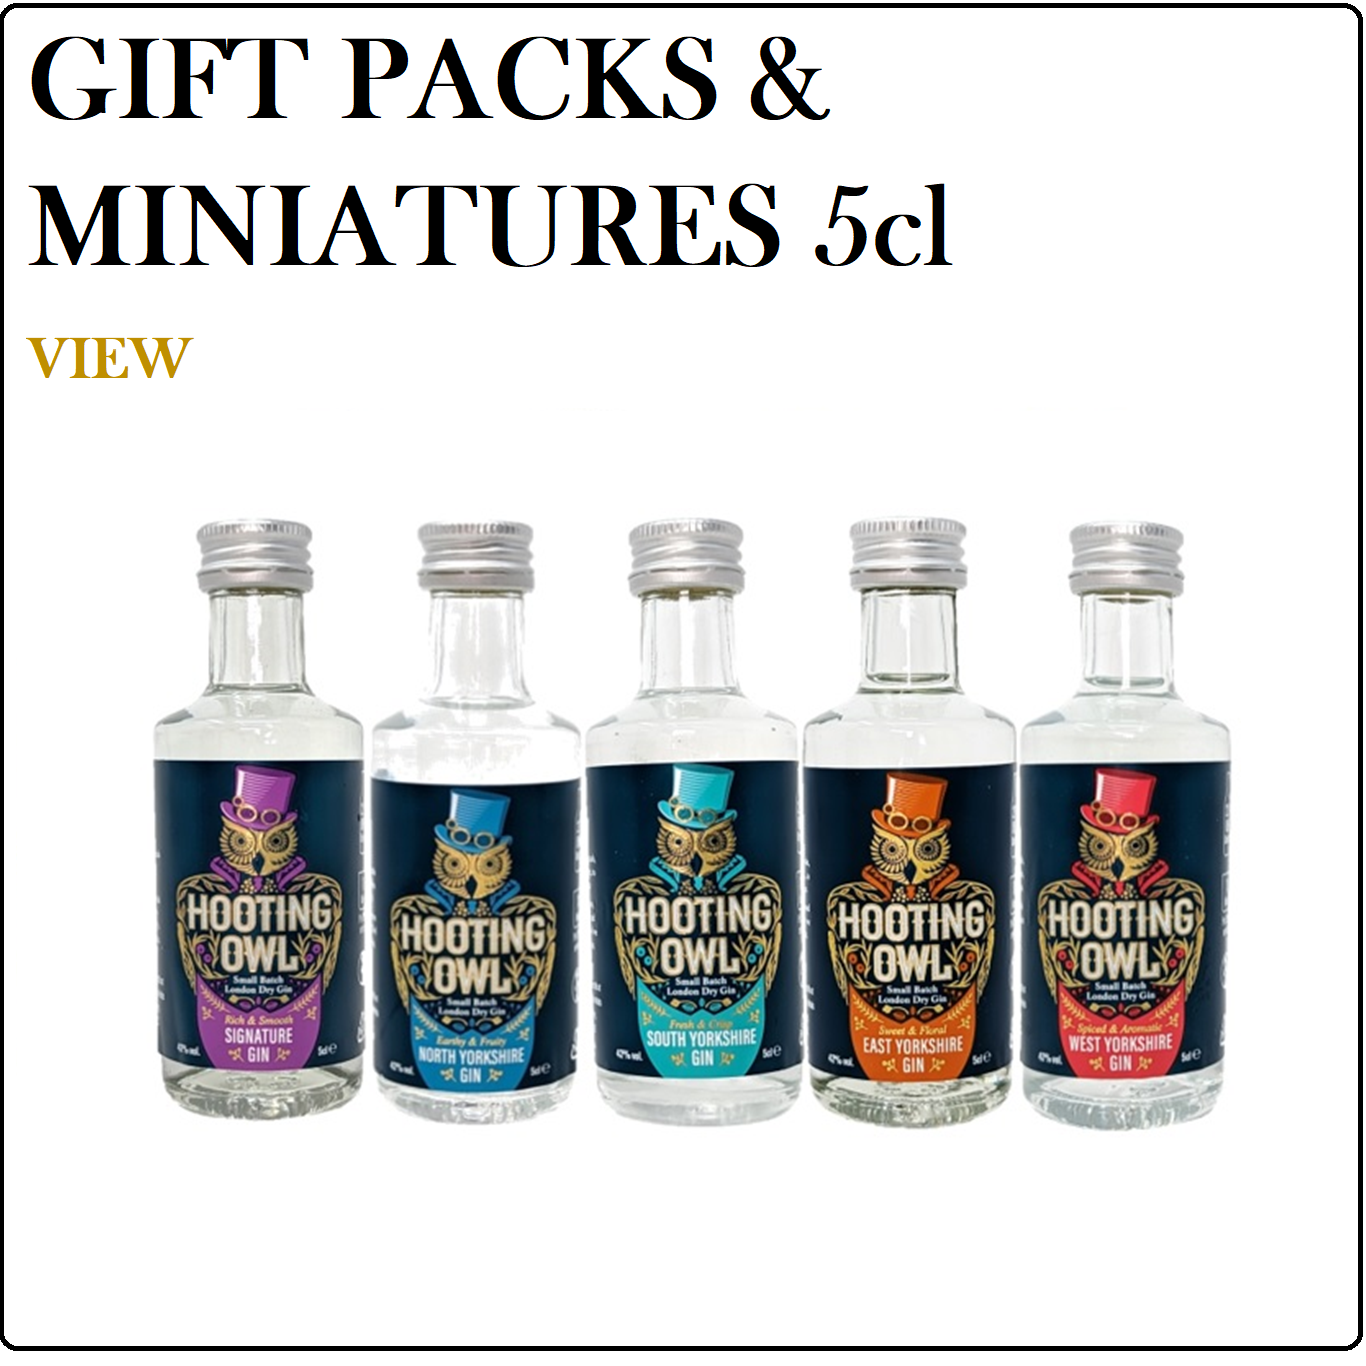 Gift Packs, Miniatures 5cl